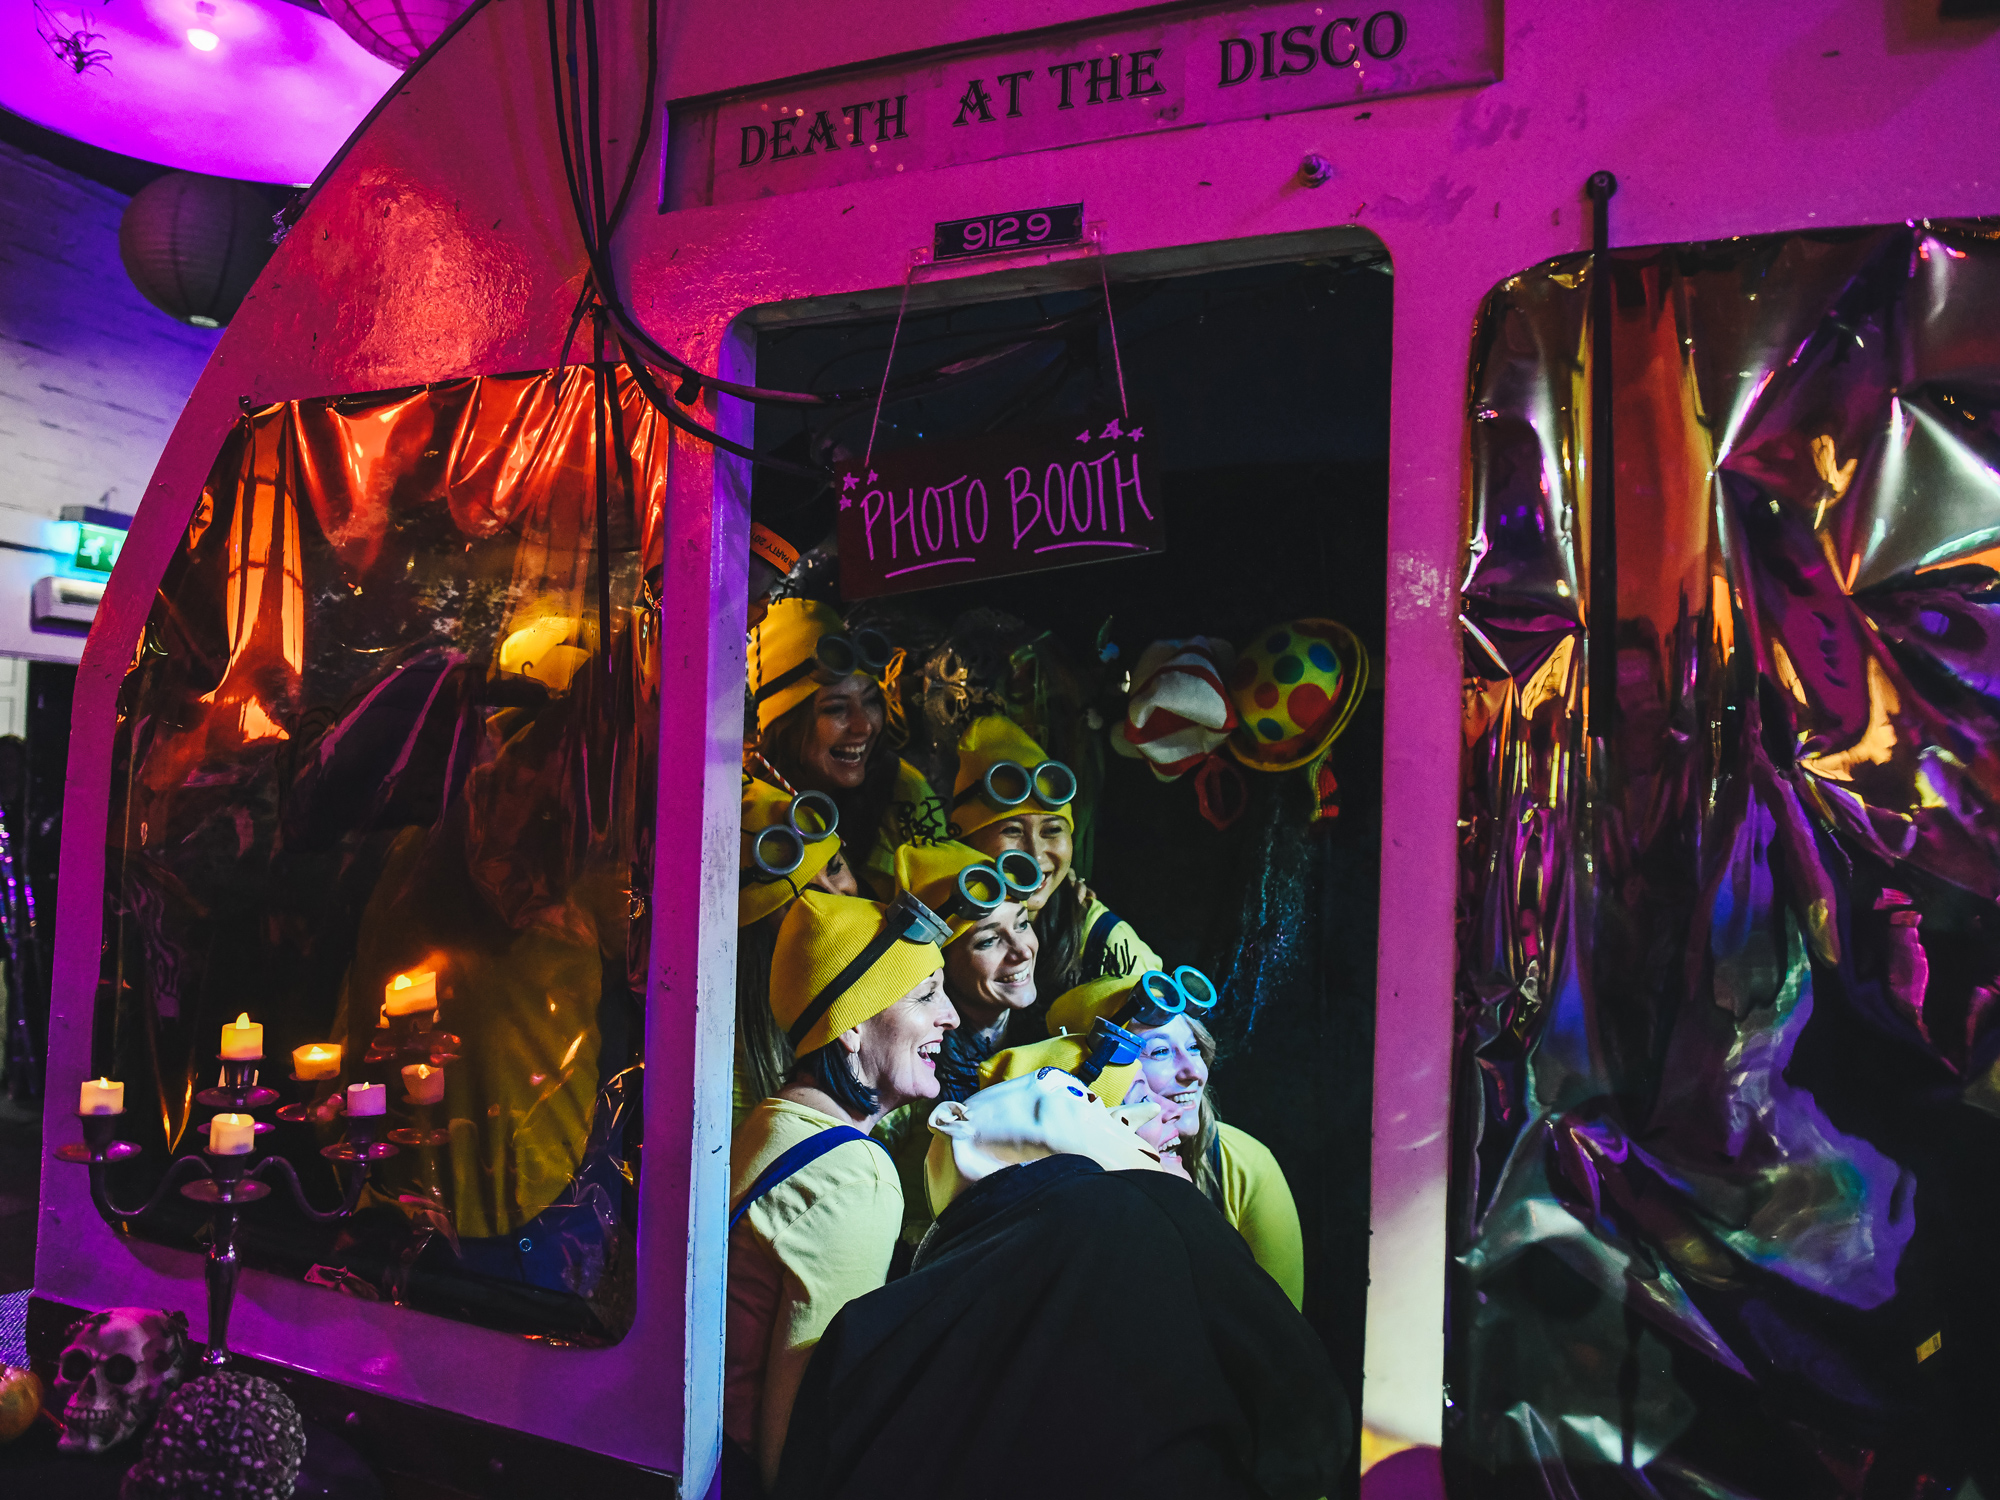 Joyful attendees in a photo booth at a themed event, “Death at the Disco,” enjoying the festive atmosphere.